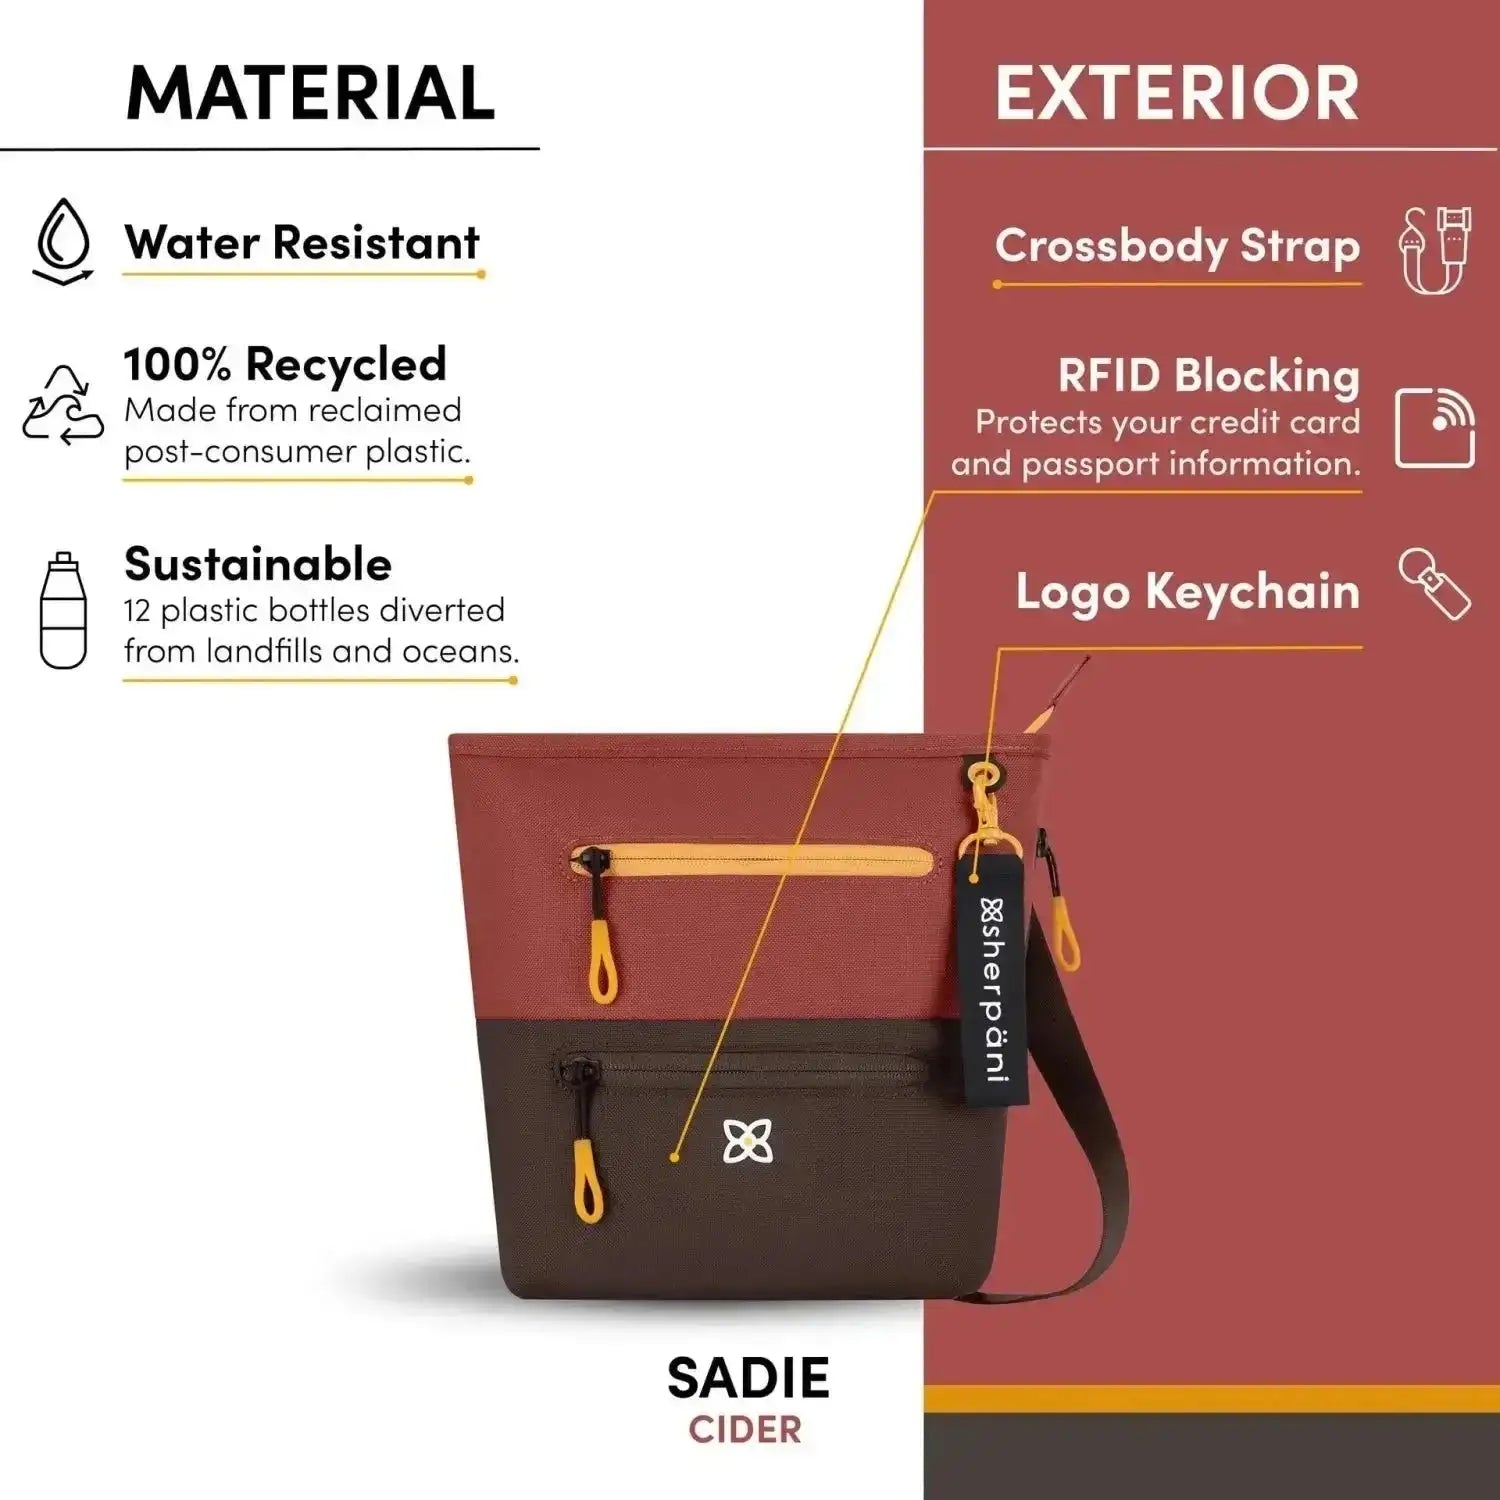 Features for the Sadie Bag. Water resistant, Recycled and Sustainable. Crossbody bad, RFID blocking and logo keychain.